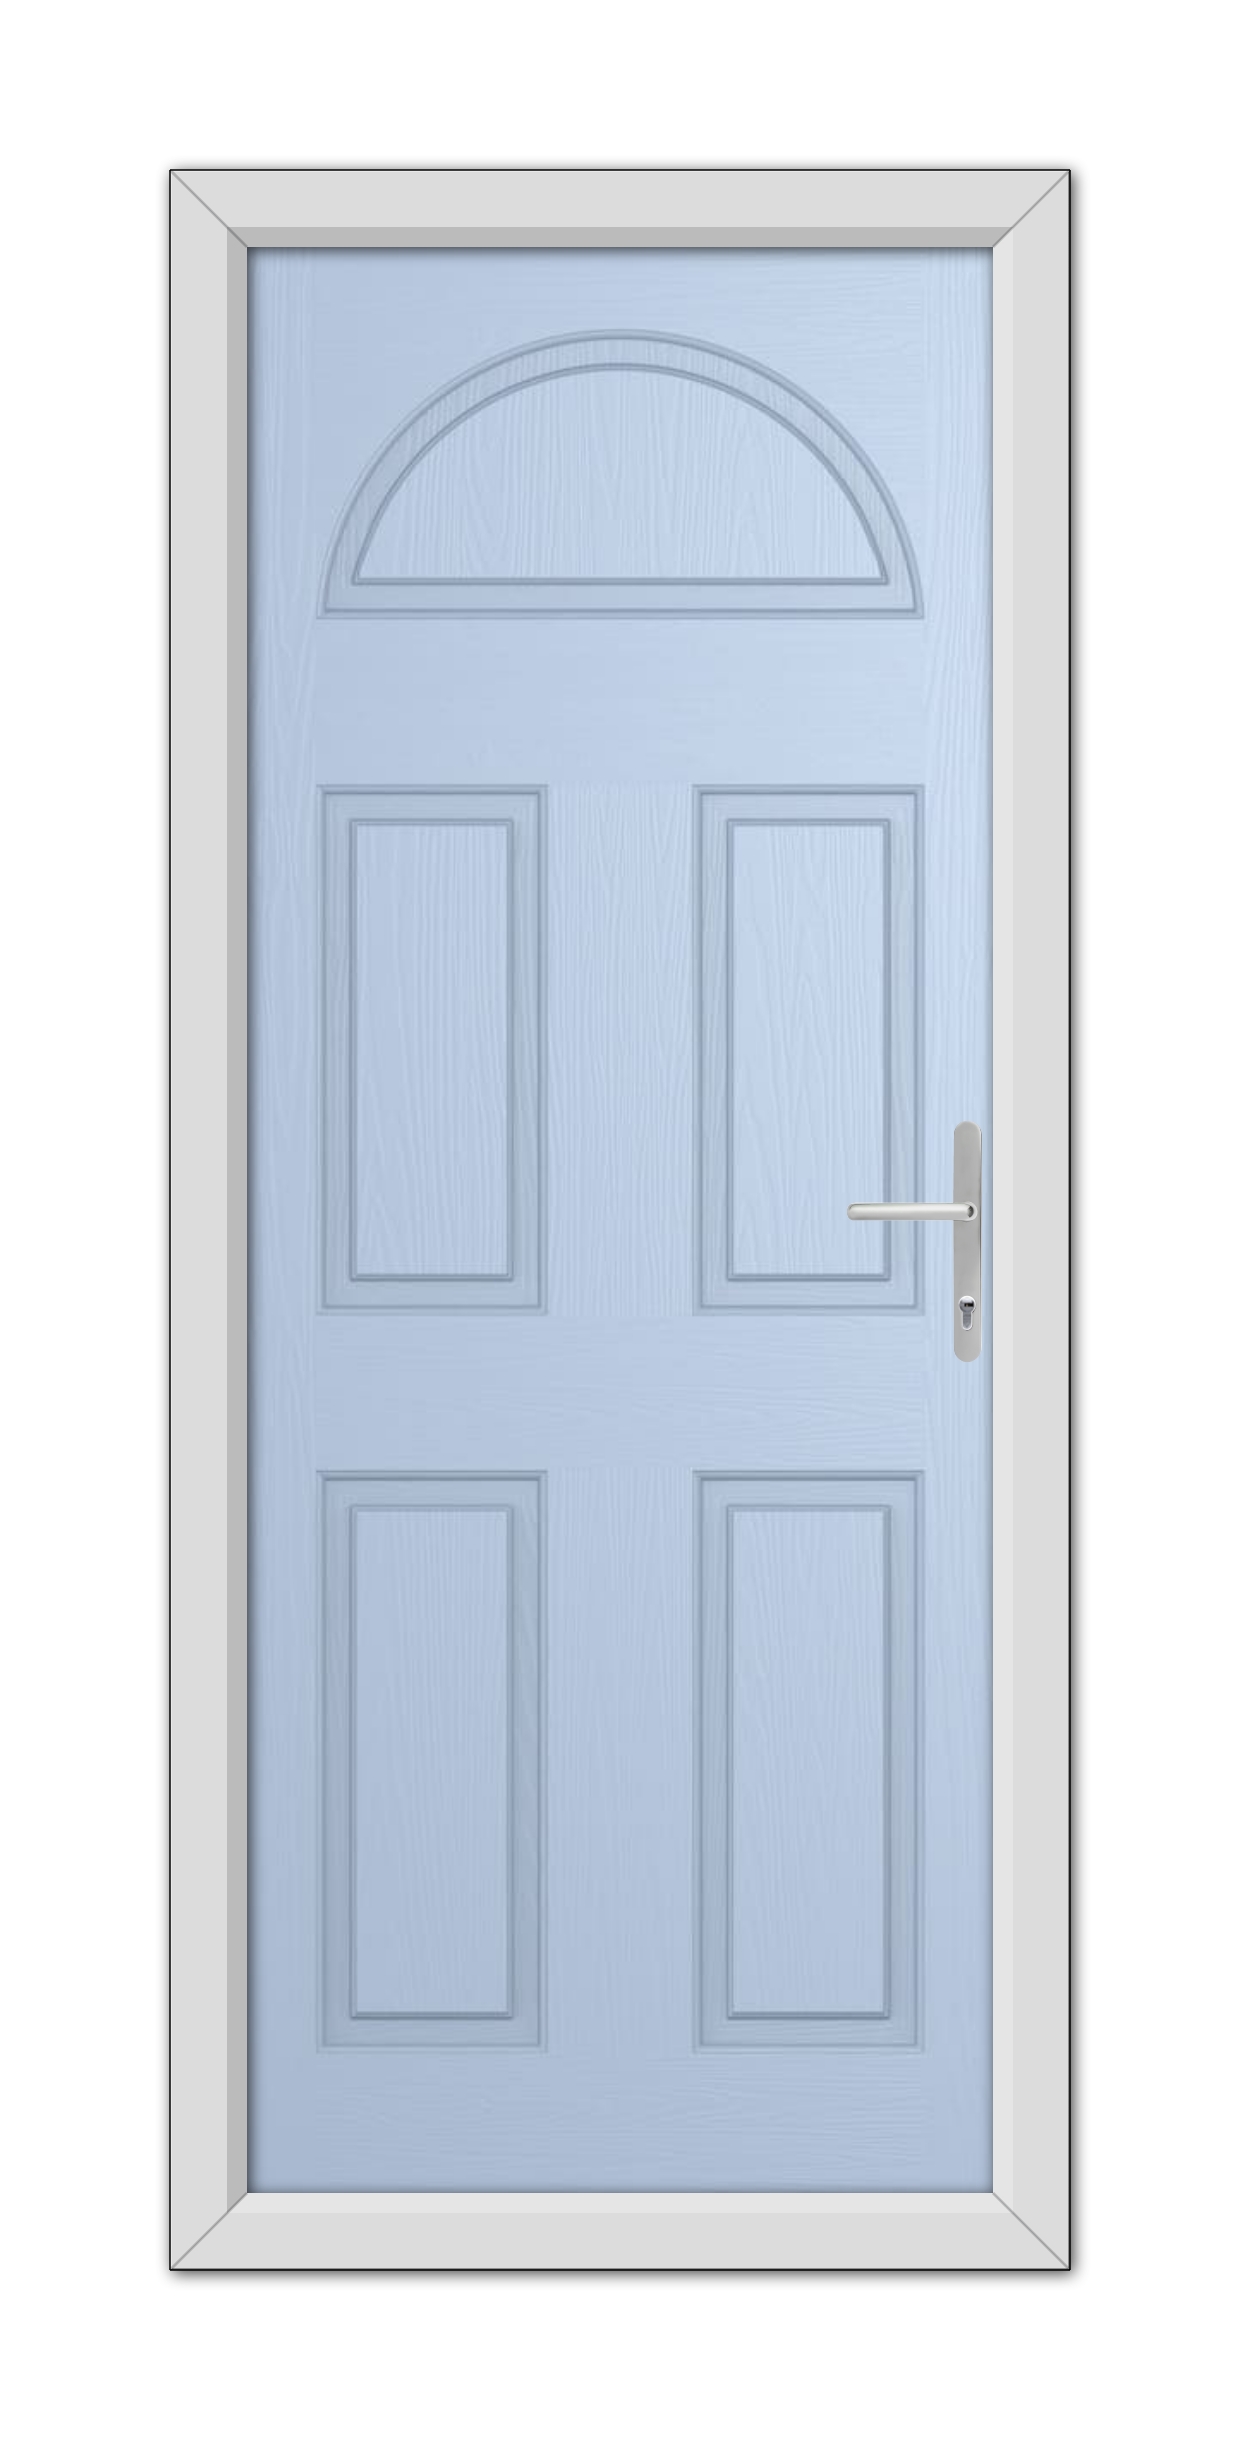 A Duck Egg Blue Middleton Solid Stable Composite Door with six panels and a semi-circular window at the top, featuring a metallic handle on the right side.